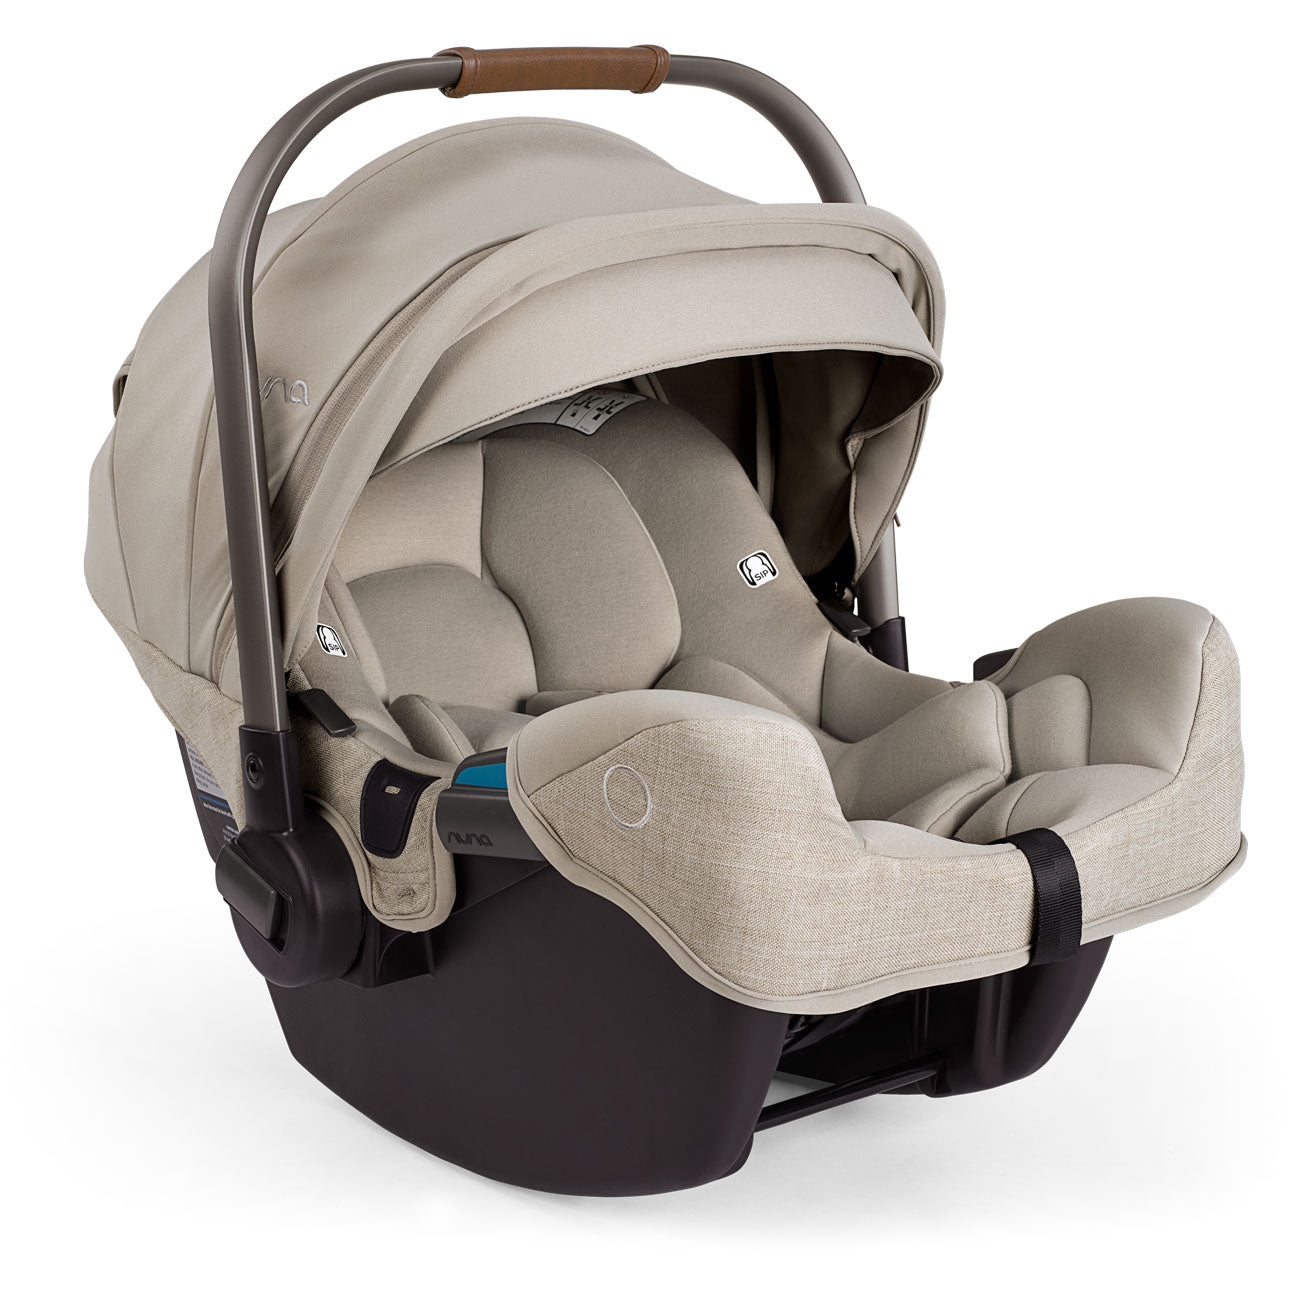 Nuna PIPA RX Infant Car Seat with RELX Base | The Baby Cubby